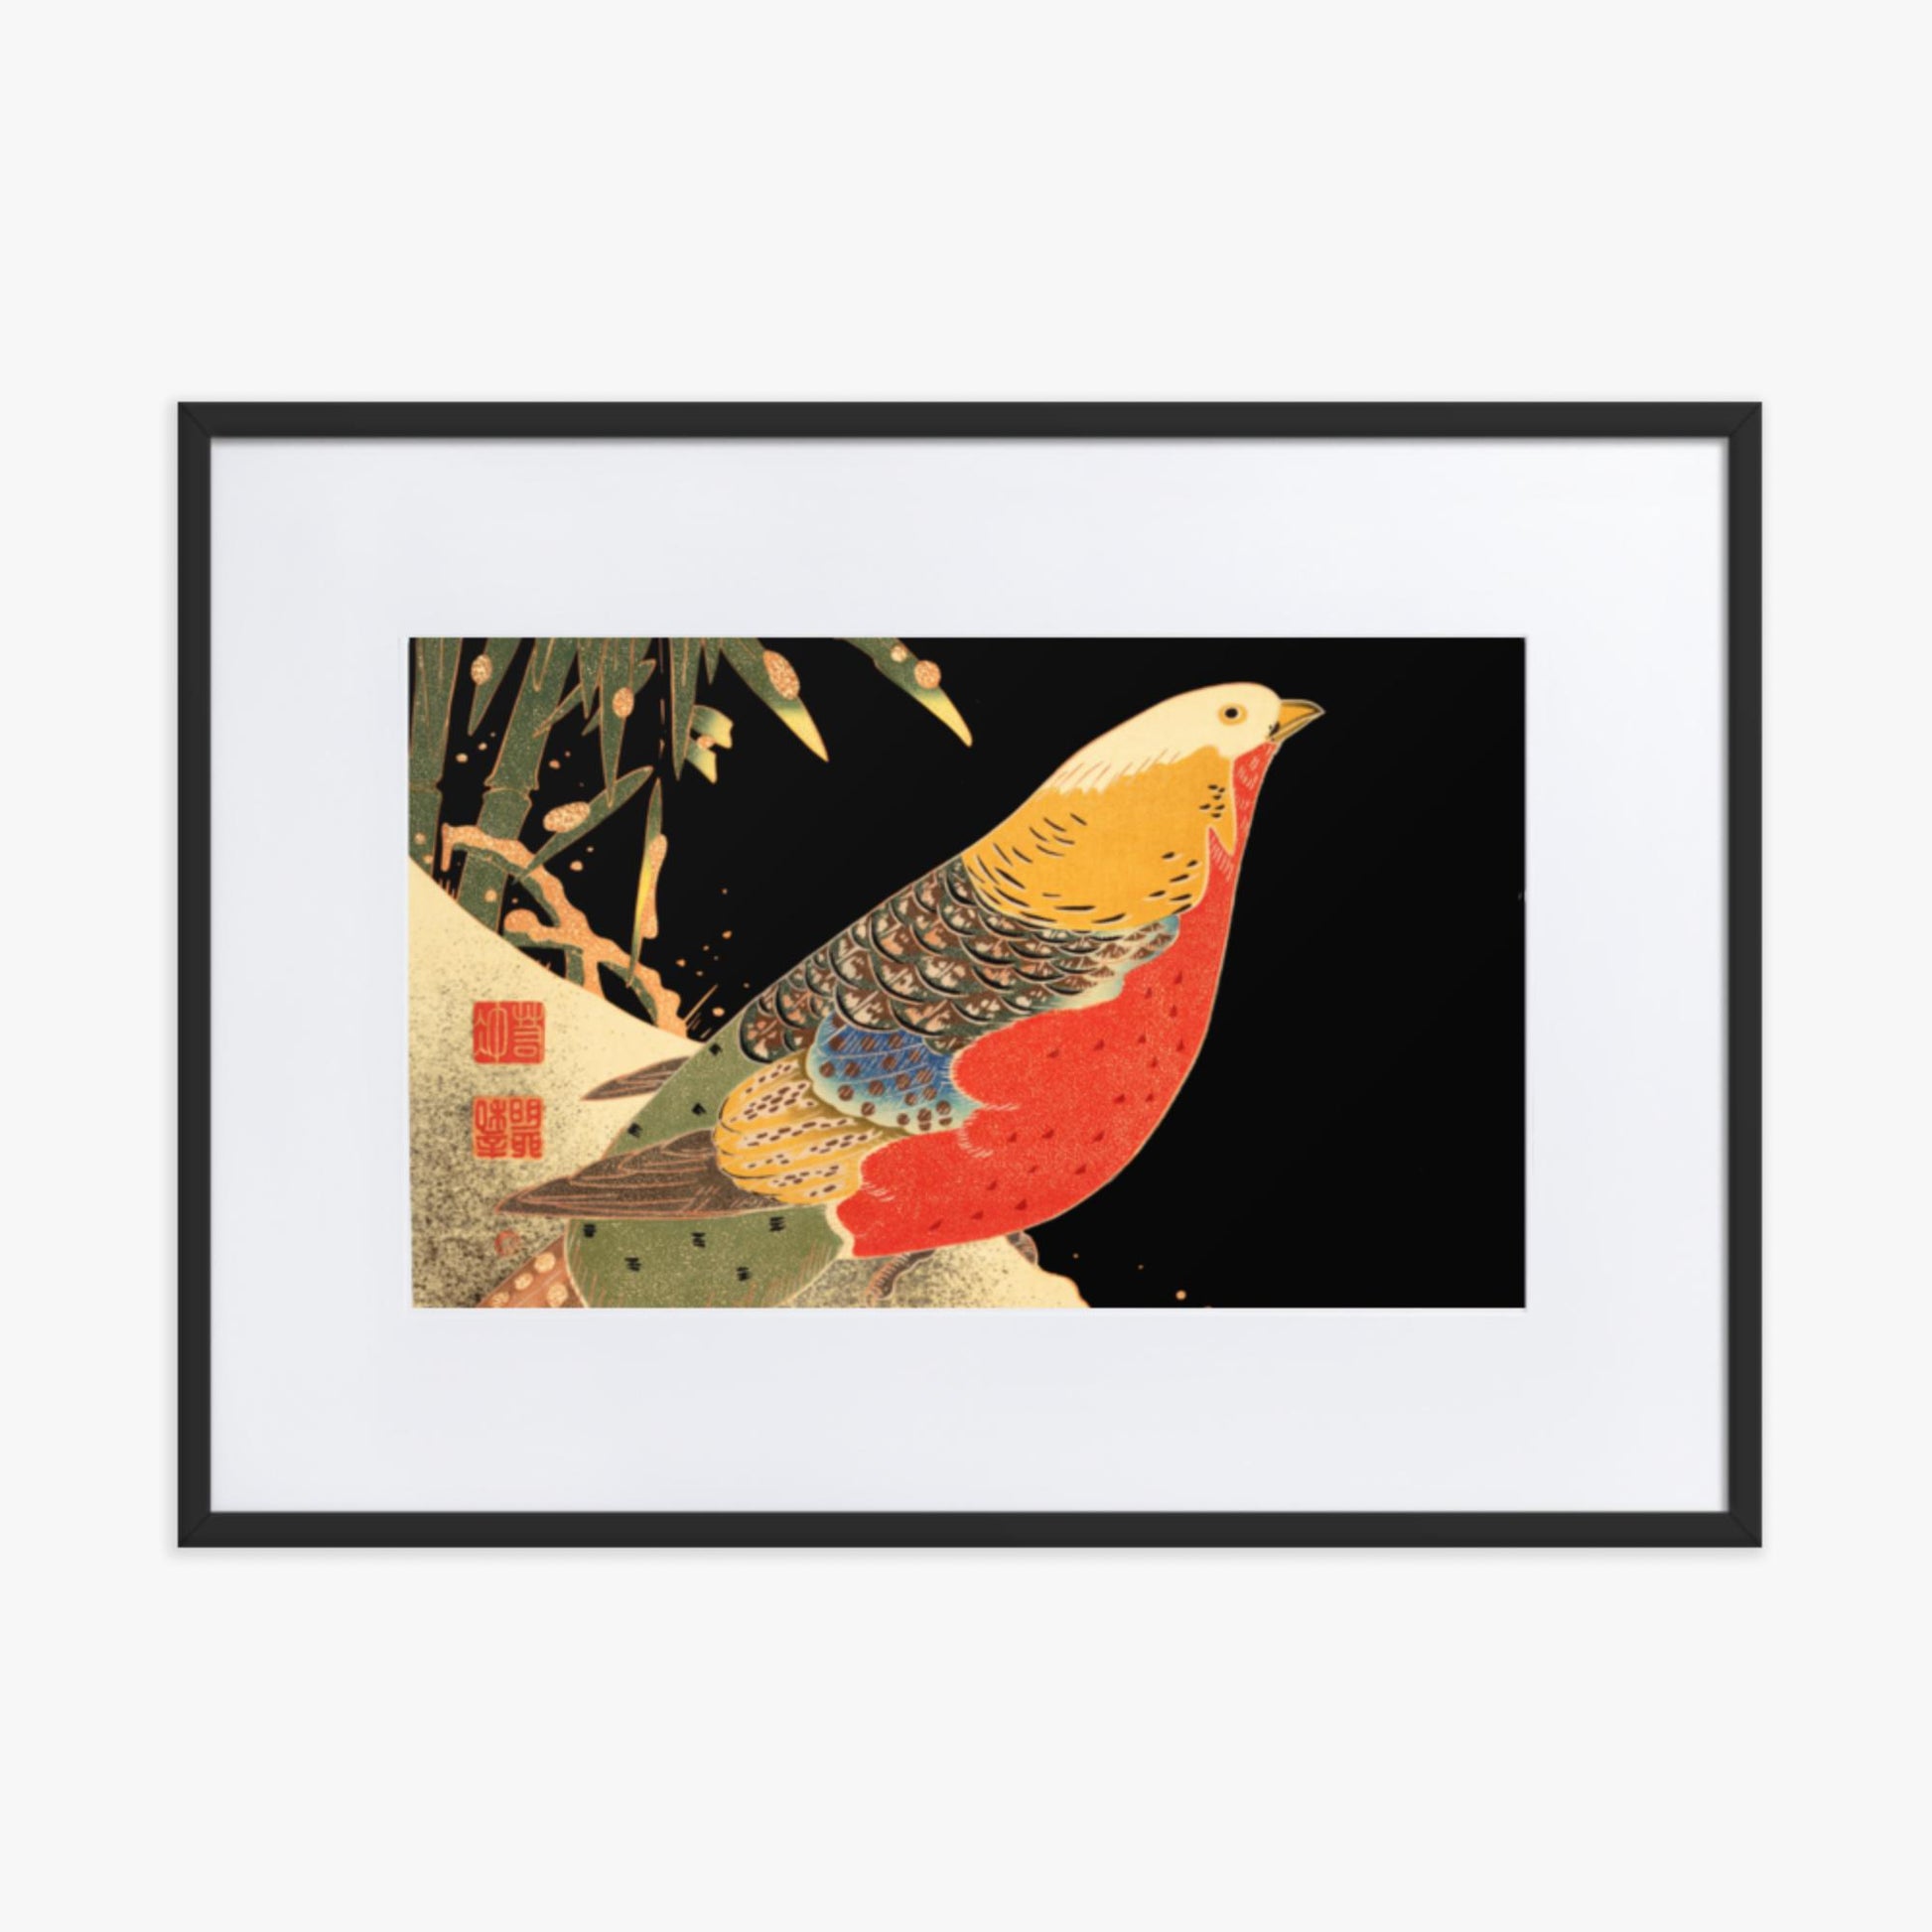 Ito Jakuchu - Golden Pheasant in the Snow 50x70 cm Poster With Black Frame